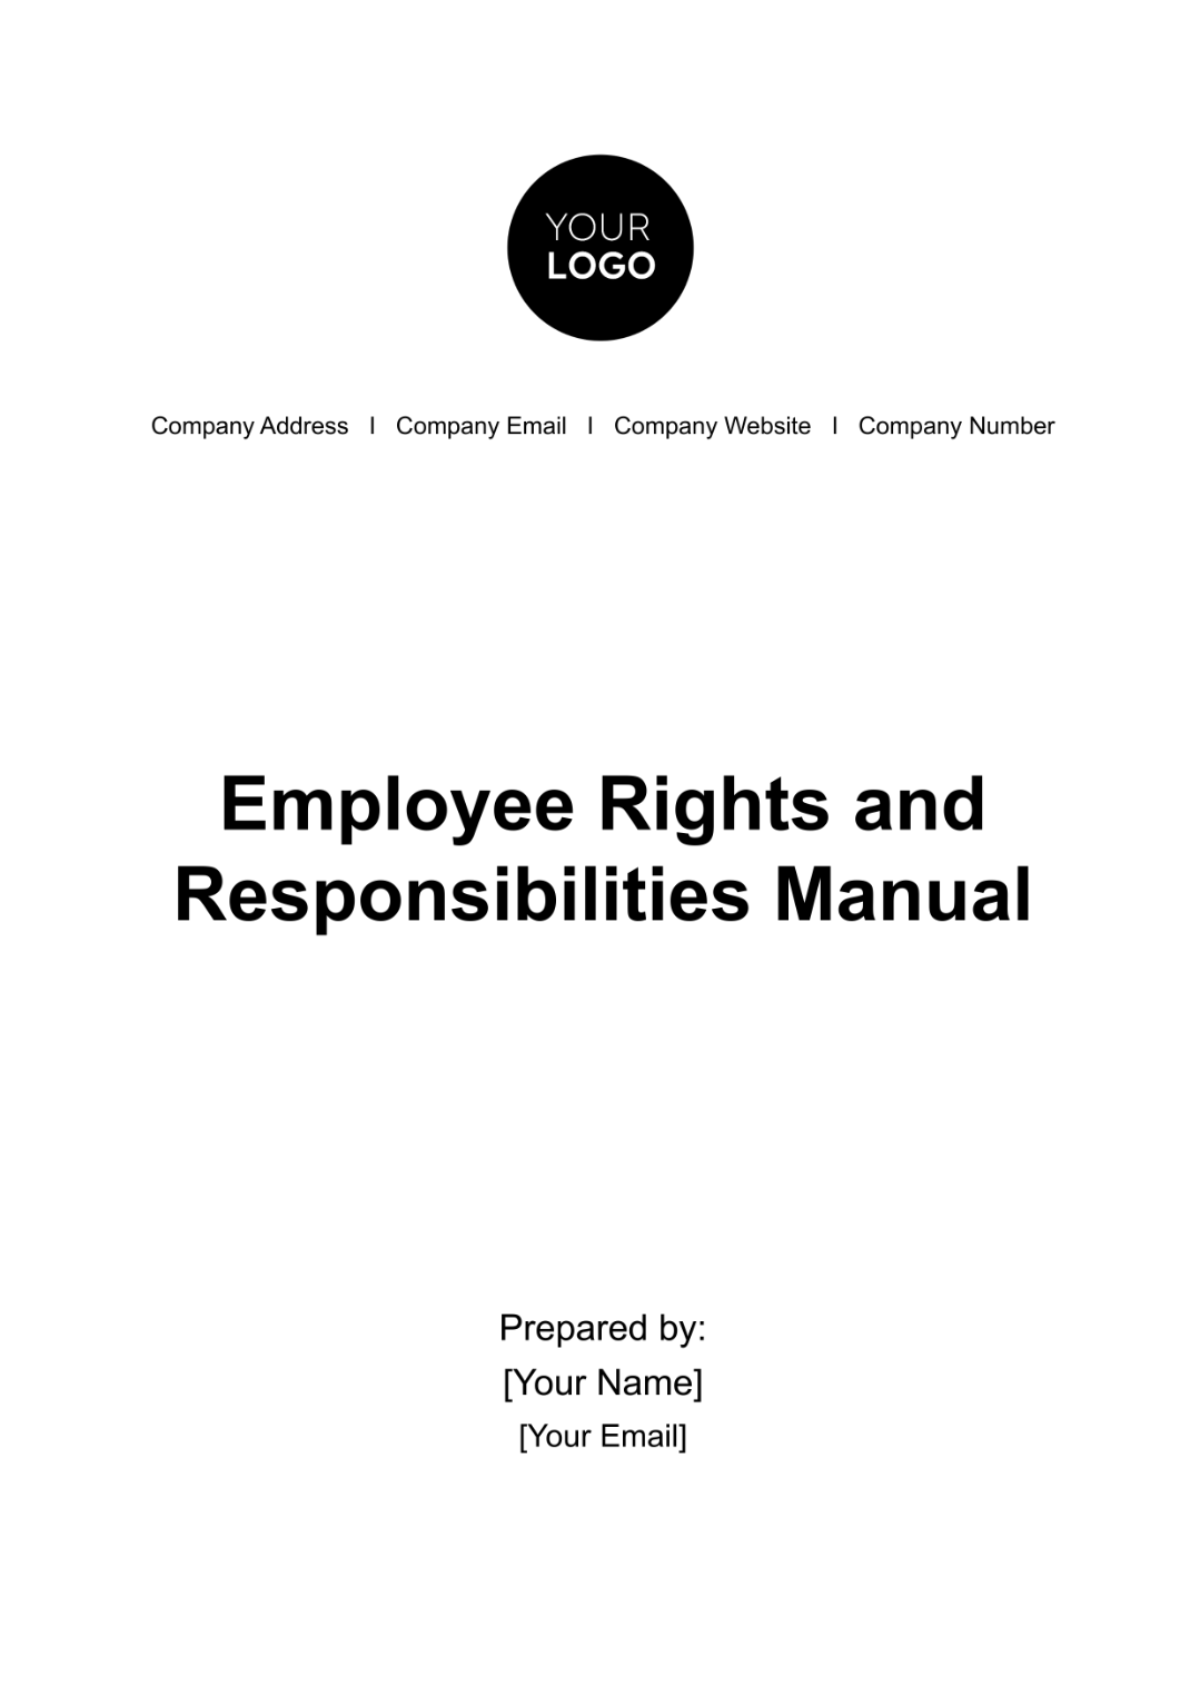 Employee Rights & Responsibilities Manual HR Template